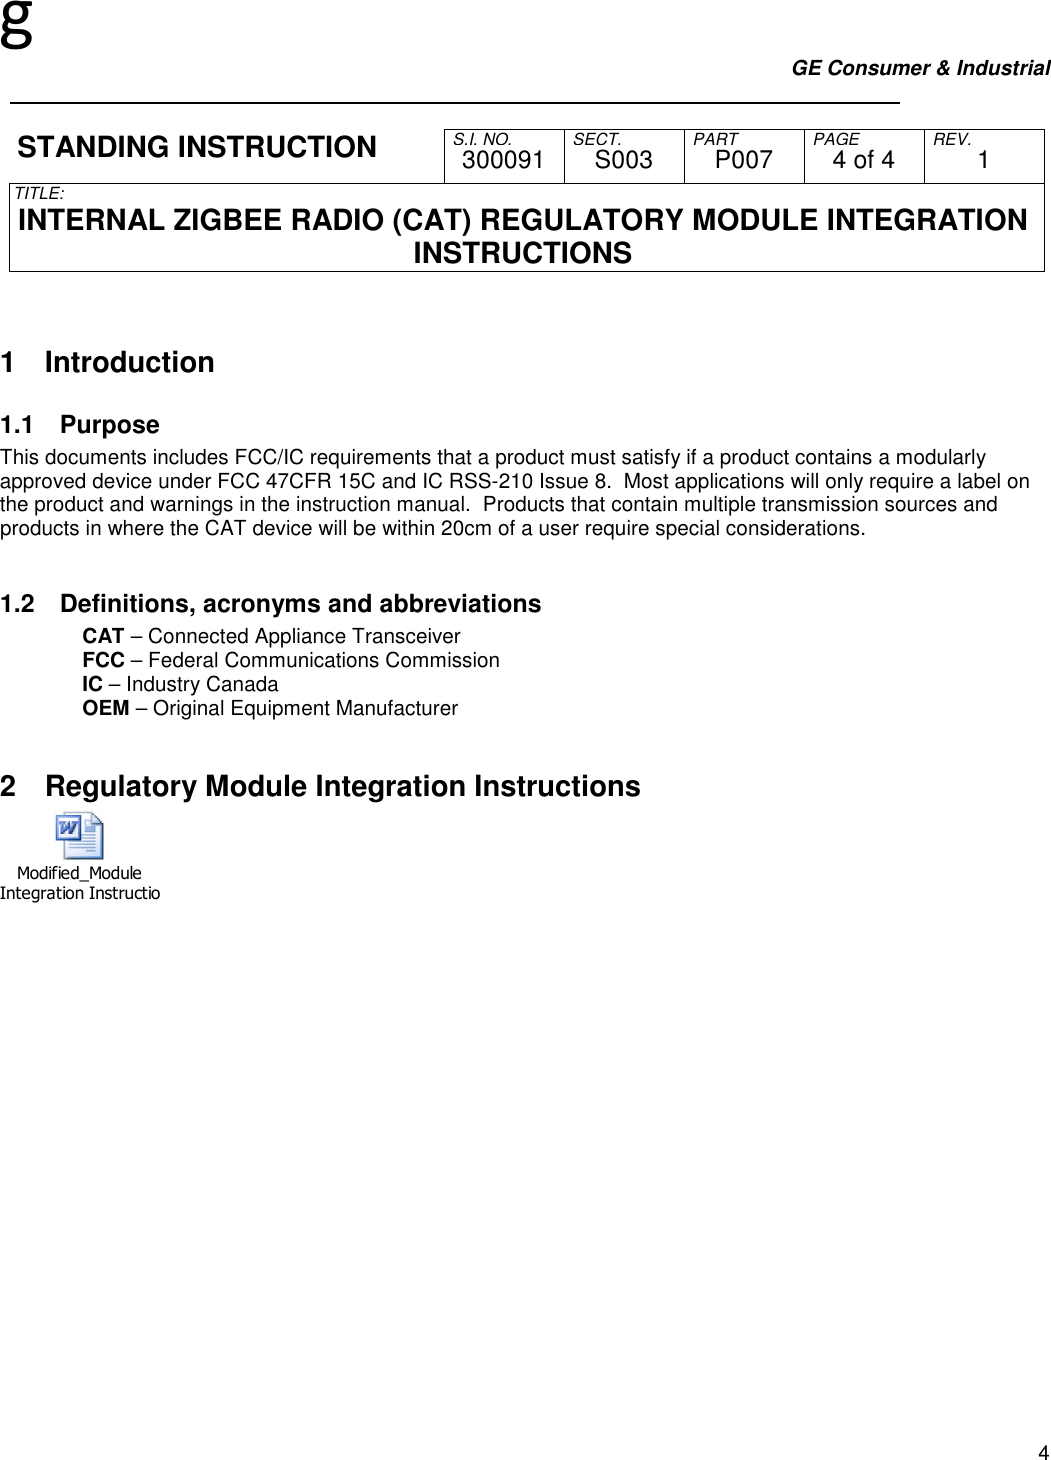 g GE Consumer &amp; Industrial     S.I. NO. SECT. PART PAGE REV. STANDING INSTRUCTION  300091  S003  P007  4 of 4  1 TITLE:  INTERNAL ZIGBEE RADIO (CAT) REGULATORY MODULE INTEGRATION INSTRUCTIONS   4  1  Introduction 1.1  Purpose This documents includes FCC/IC requirements that a product must satisfy if a product contains a modularly approved device under FCC 47CFR 15C and IC RSS-210 Issue 8.  Most applications will only require a label on the product and warnings in the instruction manual.  Products that contain multiple transmission sources and products in where the CAT device will be within 20cm of a user require special considerations.  1.2  Definitions, acronyms and abbreviations CAT – Connected Appliance Transceiver FCC – Federal Communications Commission IC – Industry Canada OEM – Original Equipment Manufacturer  2  Regulatory Module Integration Instructions Modified_Module Integration Instructions.doc 